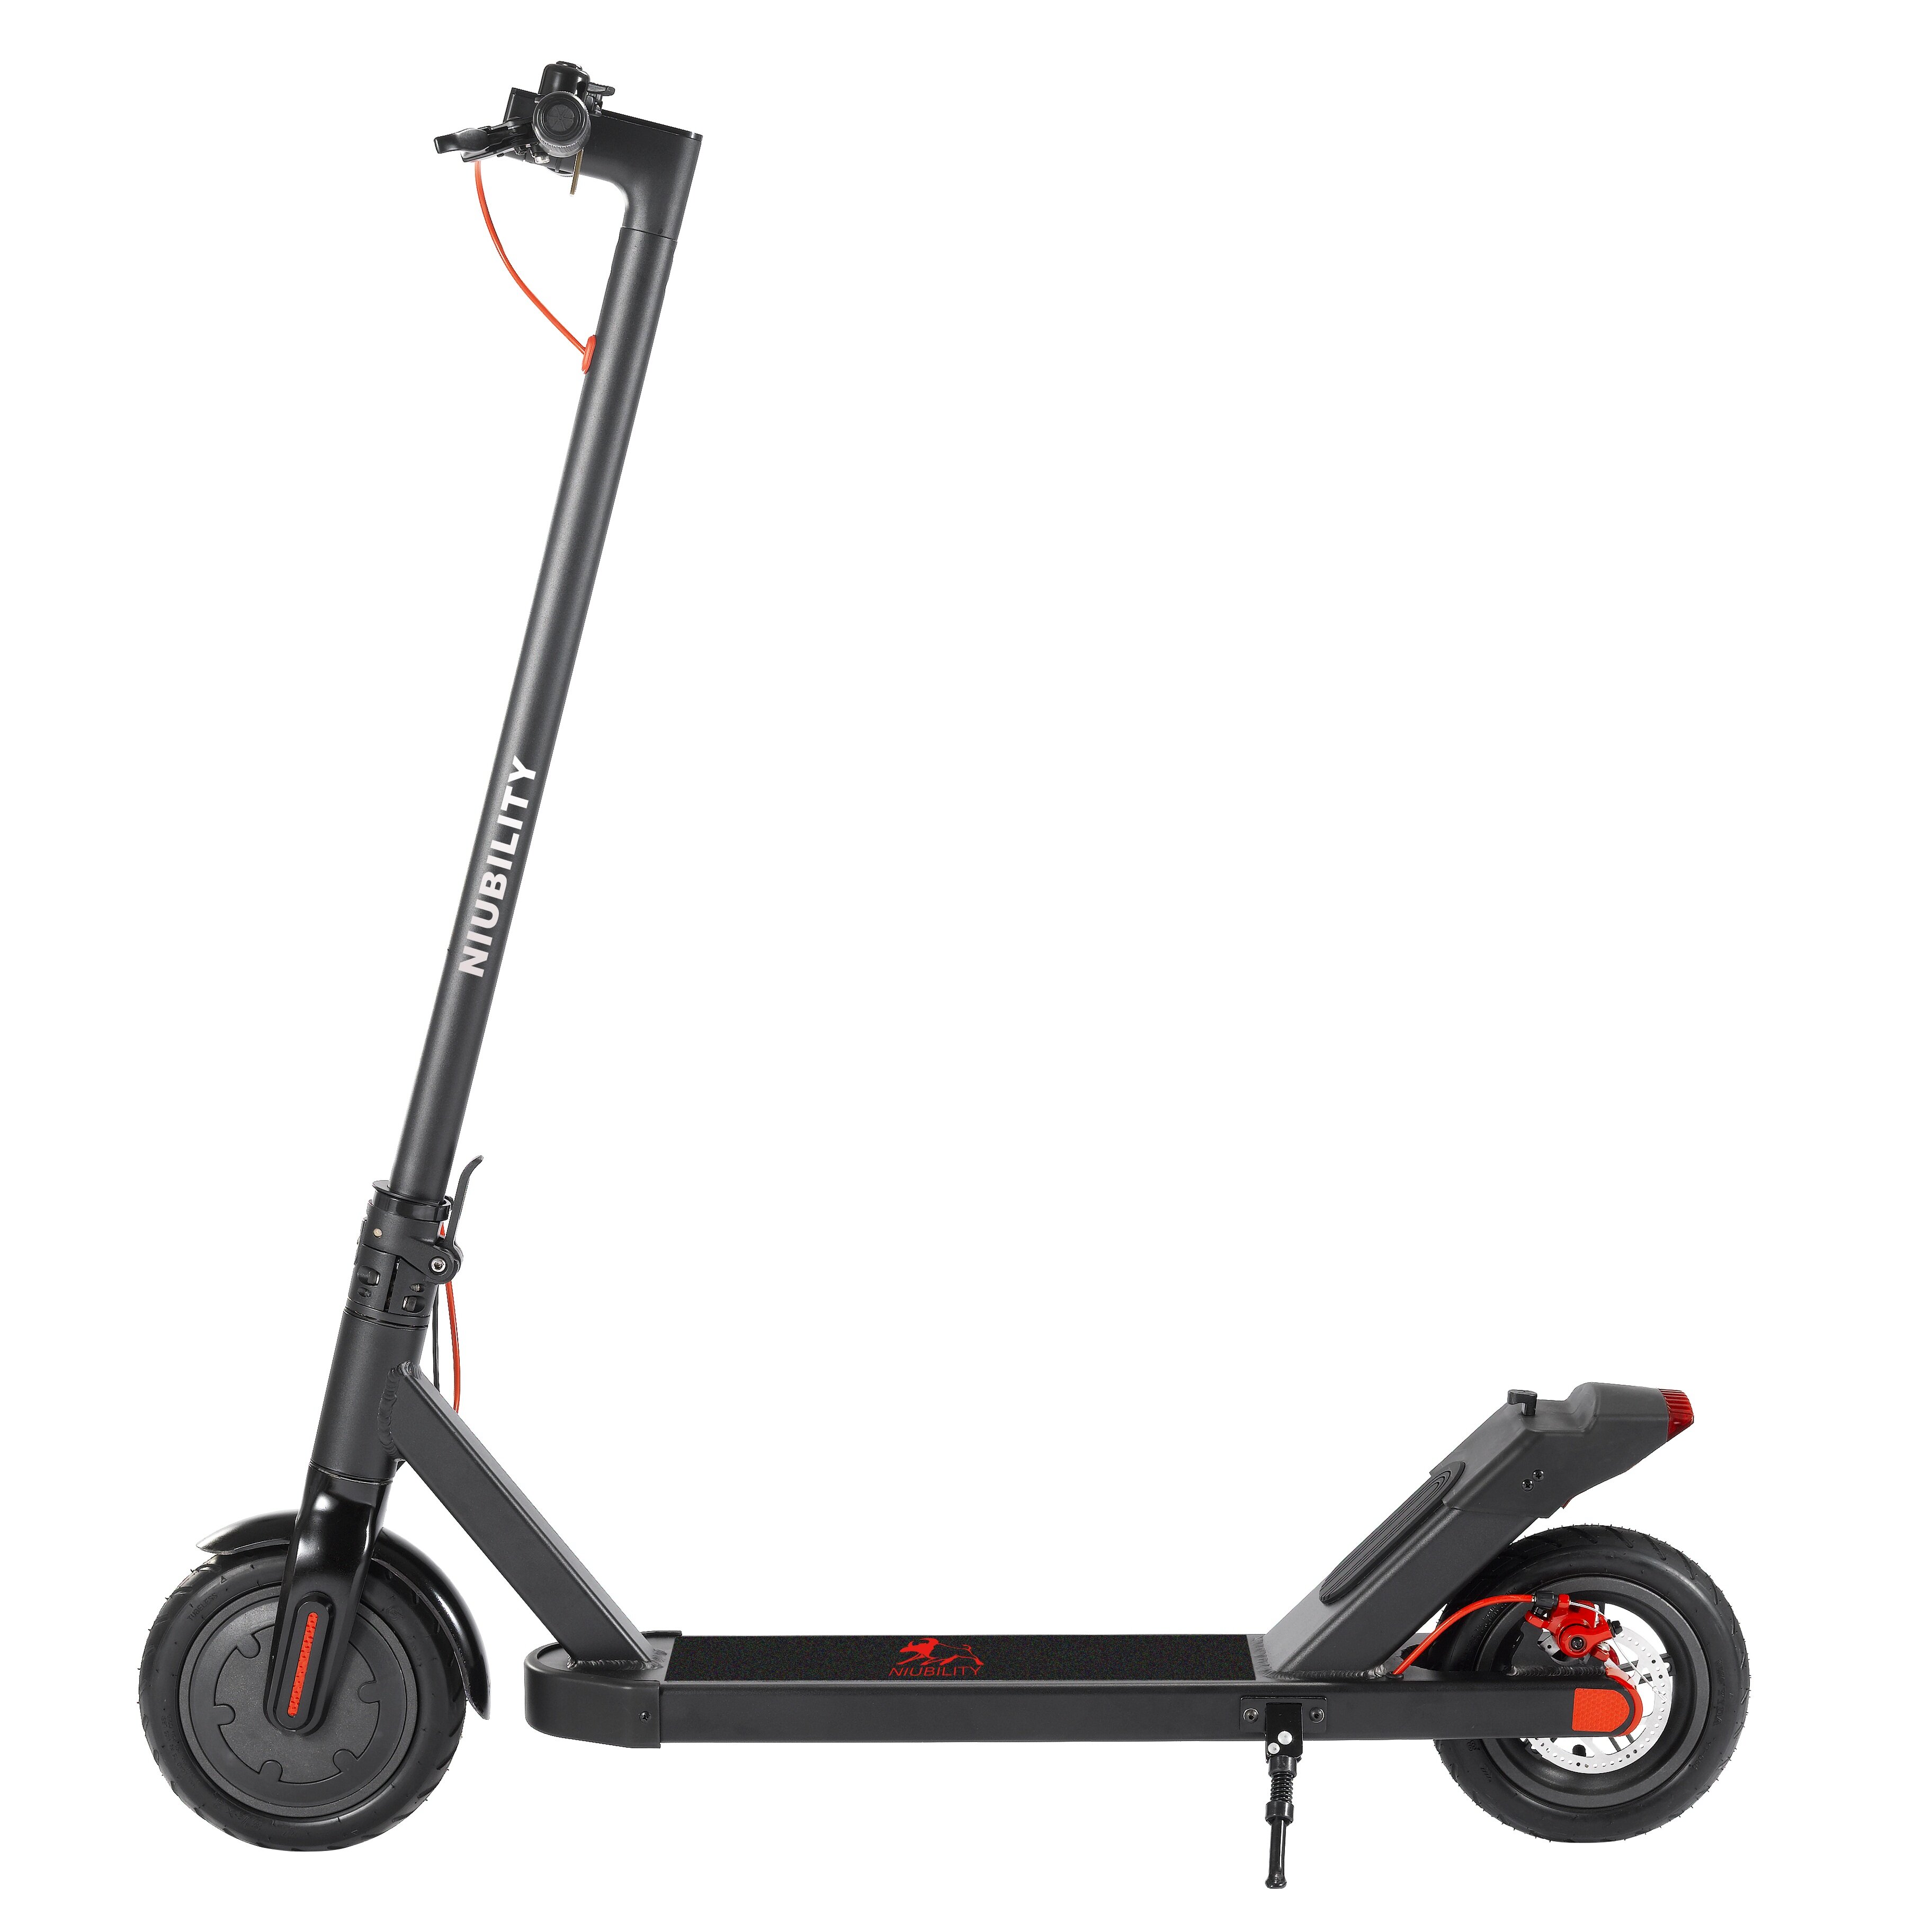 [EU Direct] Niubility N1 7.8Ah 36V 250W 8.5 Inches Tires Folding Electric Scooter 25km/h Top Speed 20-25KM Mileage Range Electric Scooter